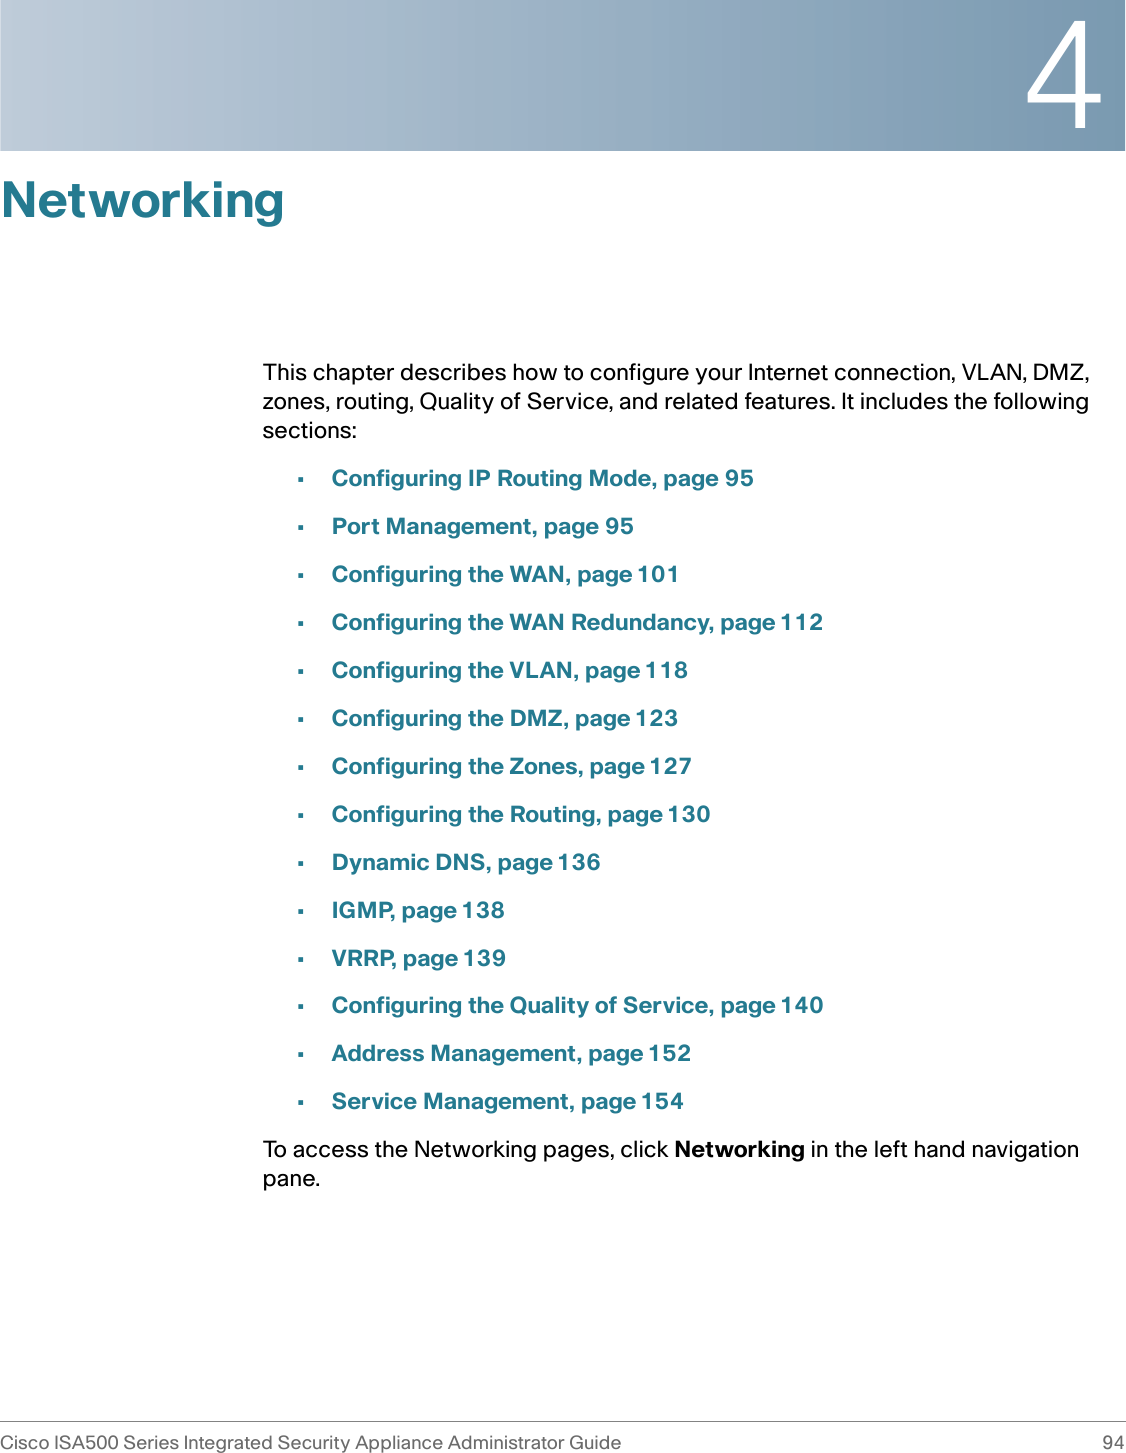 4Cisco ISA500 Series Integrated Security Appliance Administrator Guide 94 NetworkingThis chapter describes how to configure your Internet connection, VLAN, DMZ, zones, routing, Quality of Service, and related features. It includes the following sections: •Configuring IP Routing Mode, page 95•Port Management, page 95•Configuring the WAN, page 101•Configuring the WAN Redundancy, page 112•Configuring the VLAN, page 118•Configuring the DMZ, page 123•Configuring the Zones, page 127•Configuring the Routing, page 130•Dynamic DNS, page 136•IGMP, page 138•VRRP, page 139•Configuring the Quality of Service, page 140•Address Management, page 152•Service Management, page 154To access the Networking pages, click Networking in the left hand navigation pane.